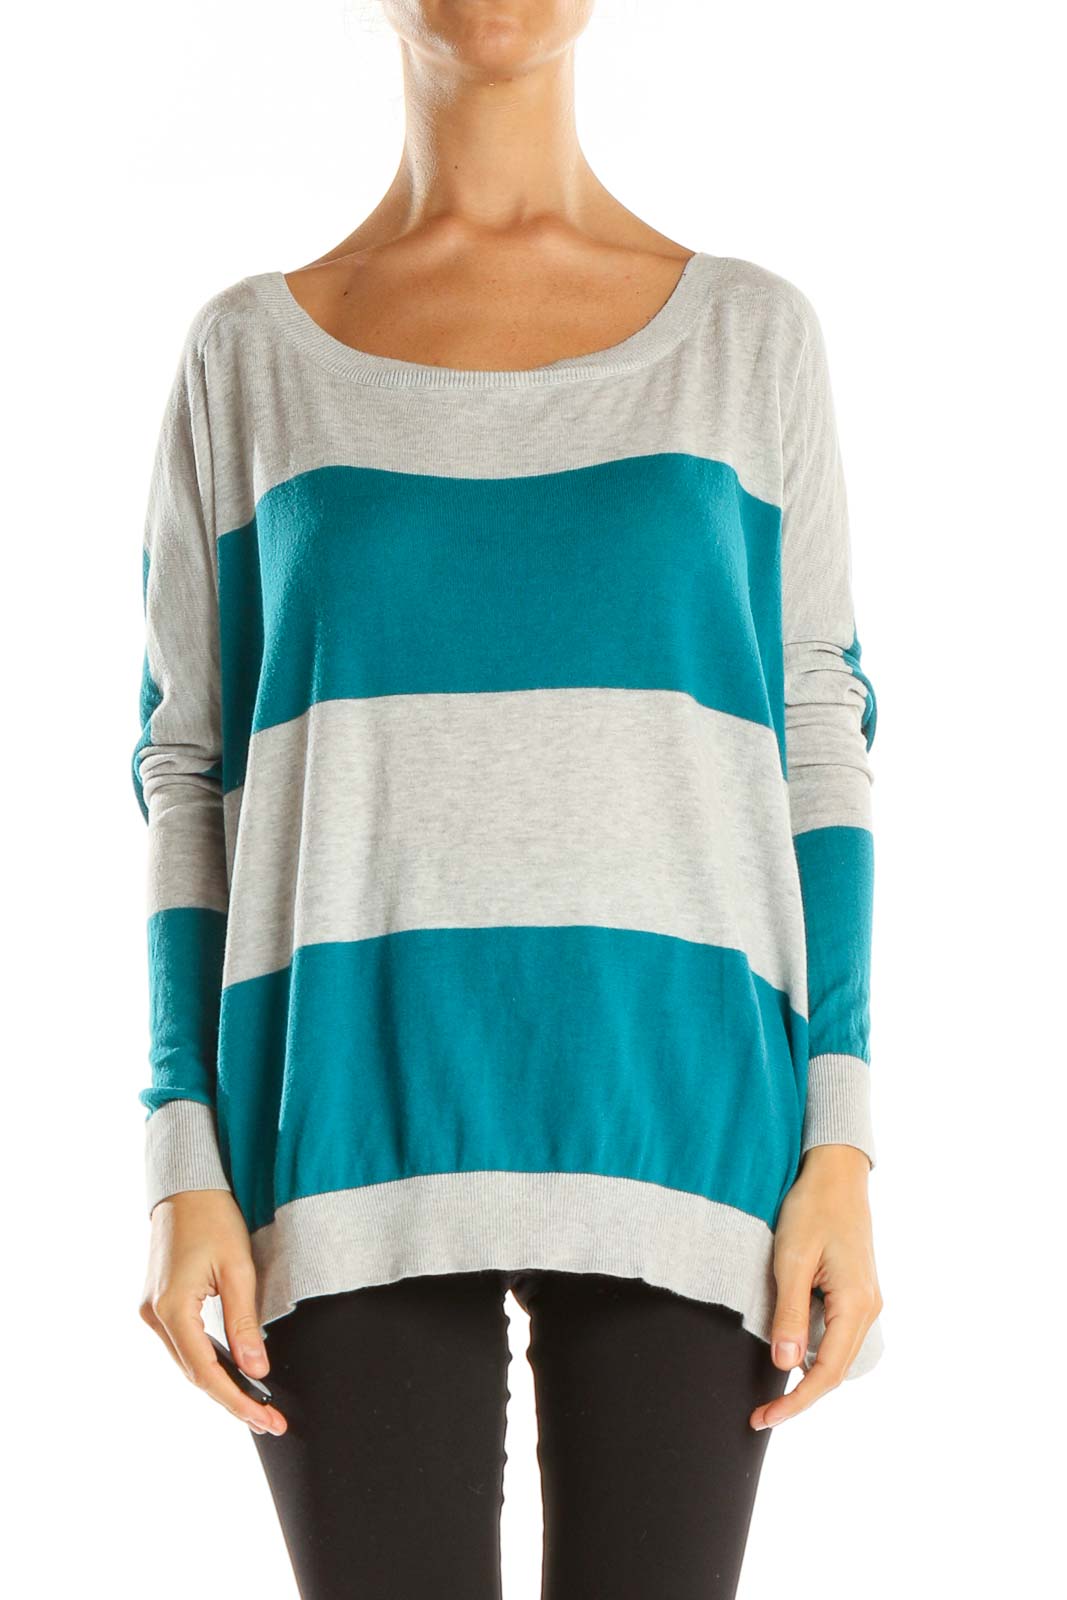 Blue Striped All Day Wear T-Shirt Front